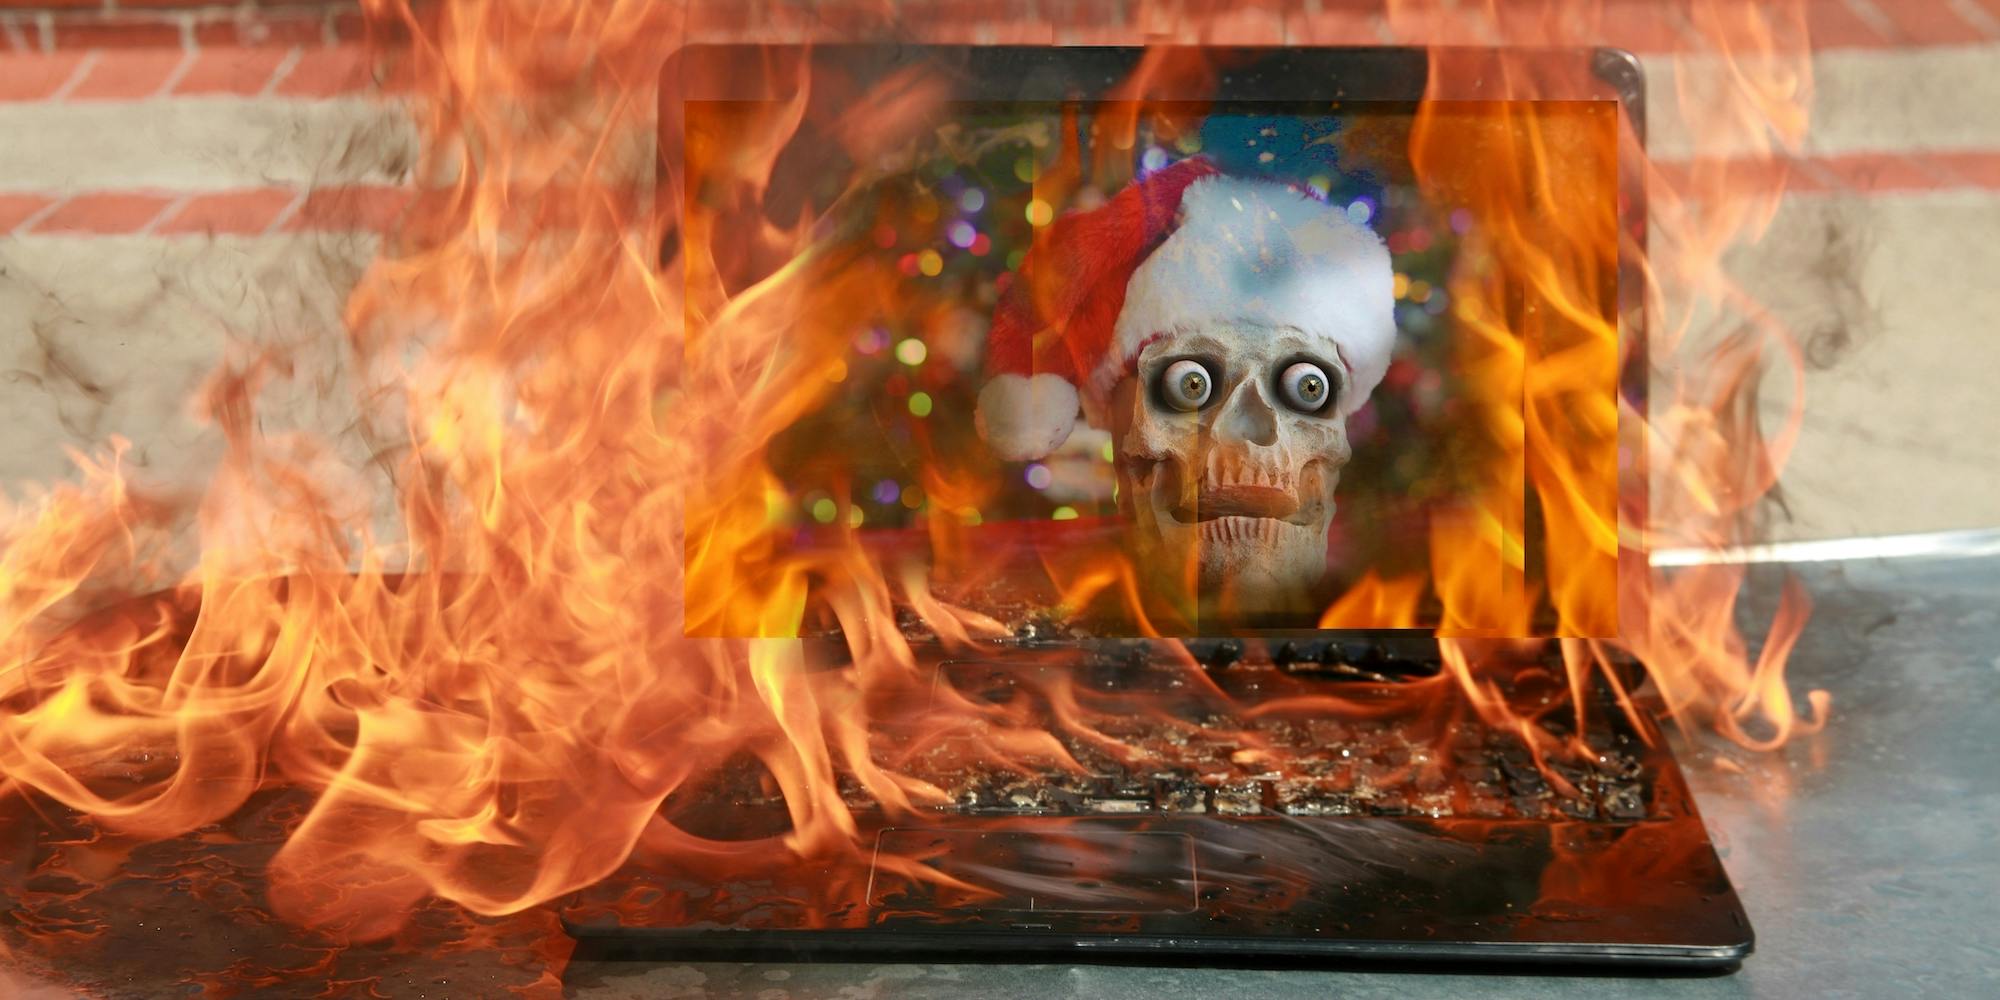 Creating When the World Is on Fire: A Christmas Eulogy for a Bad Year